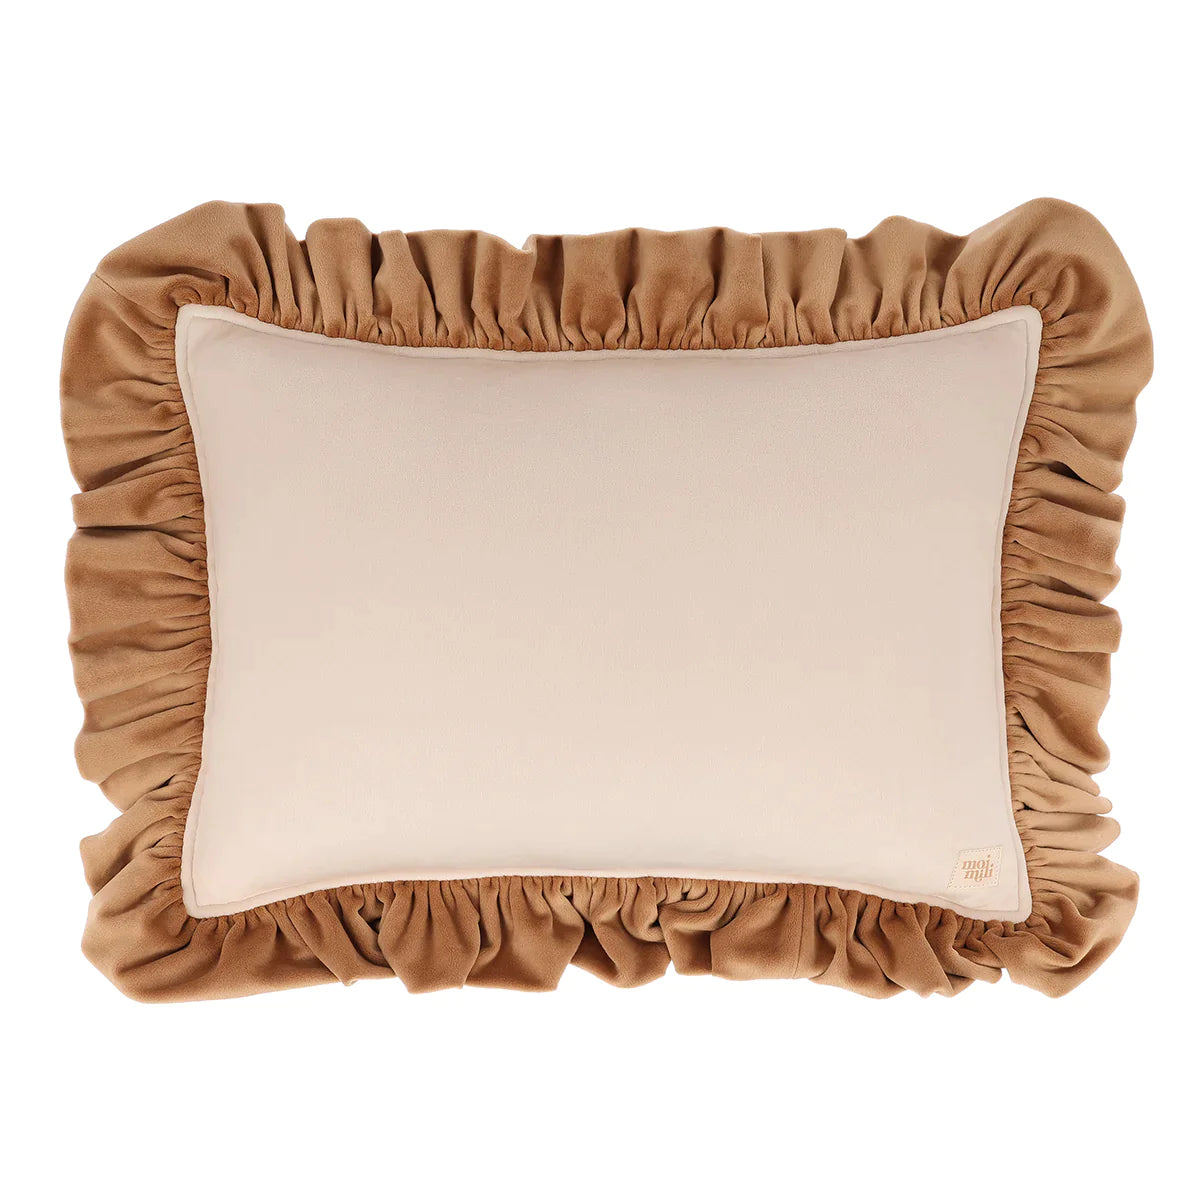 "Cappuccino" Soft Velvet Pillow with Frill